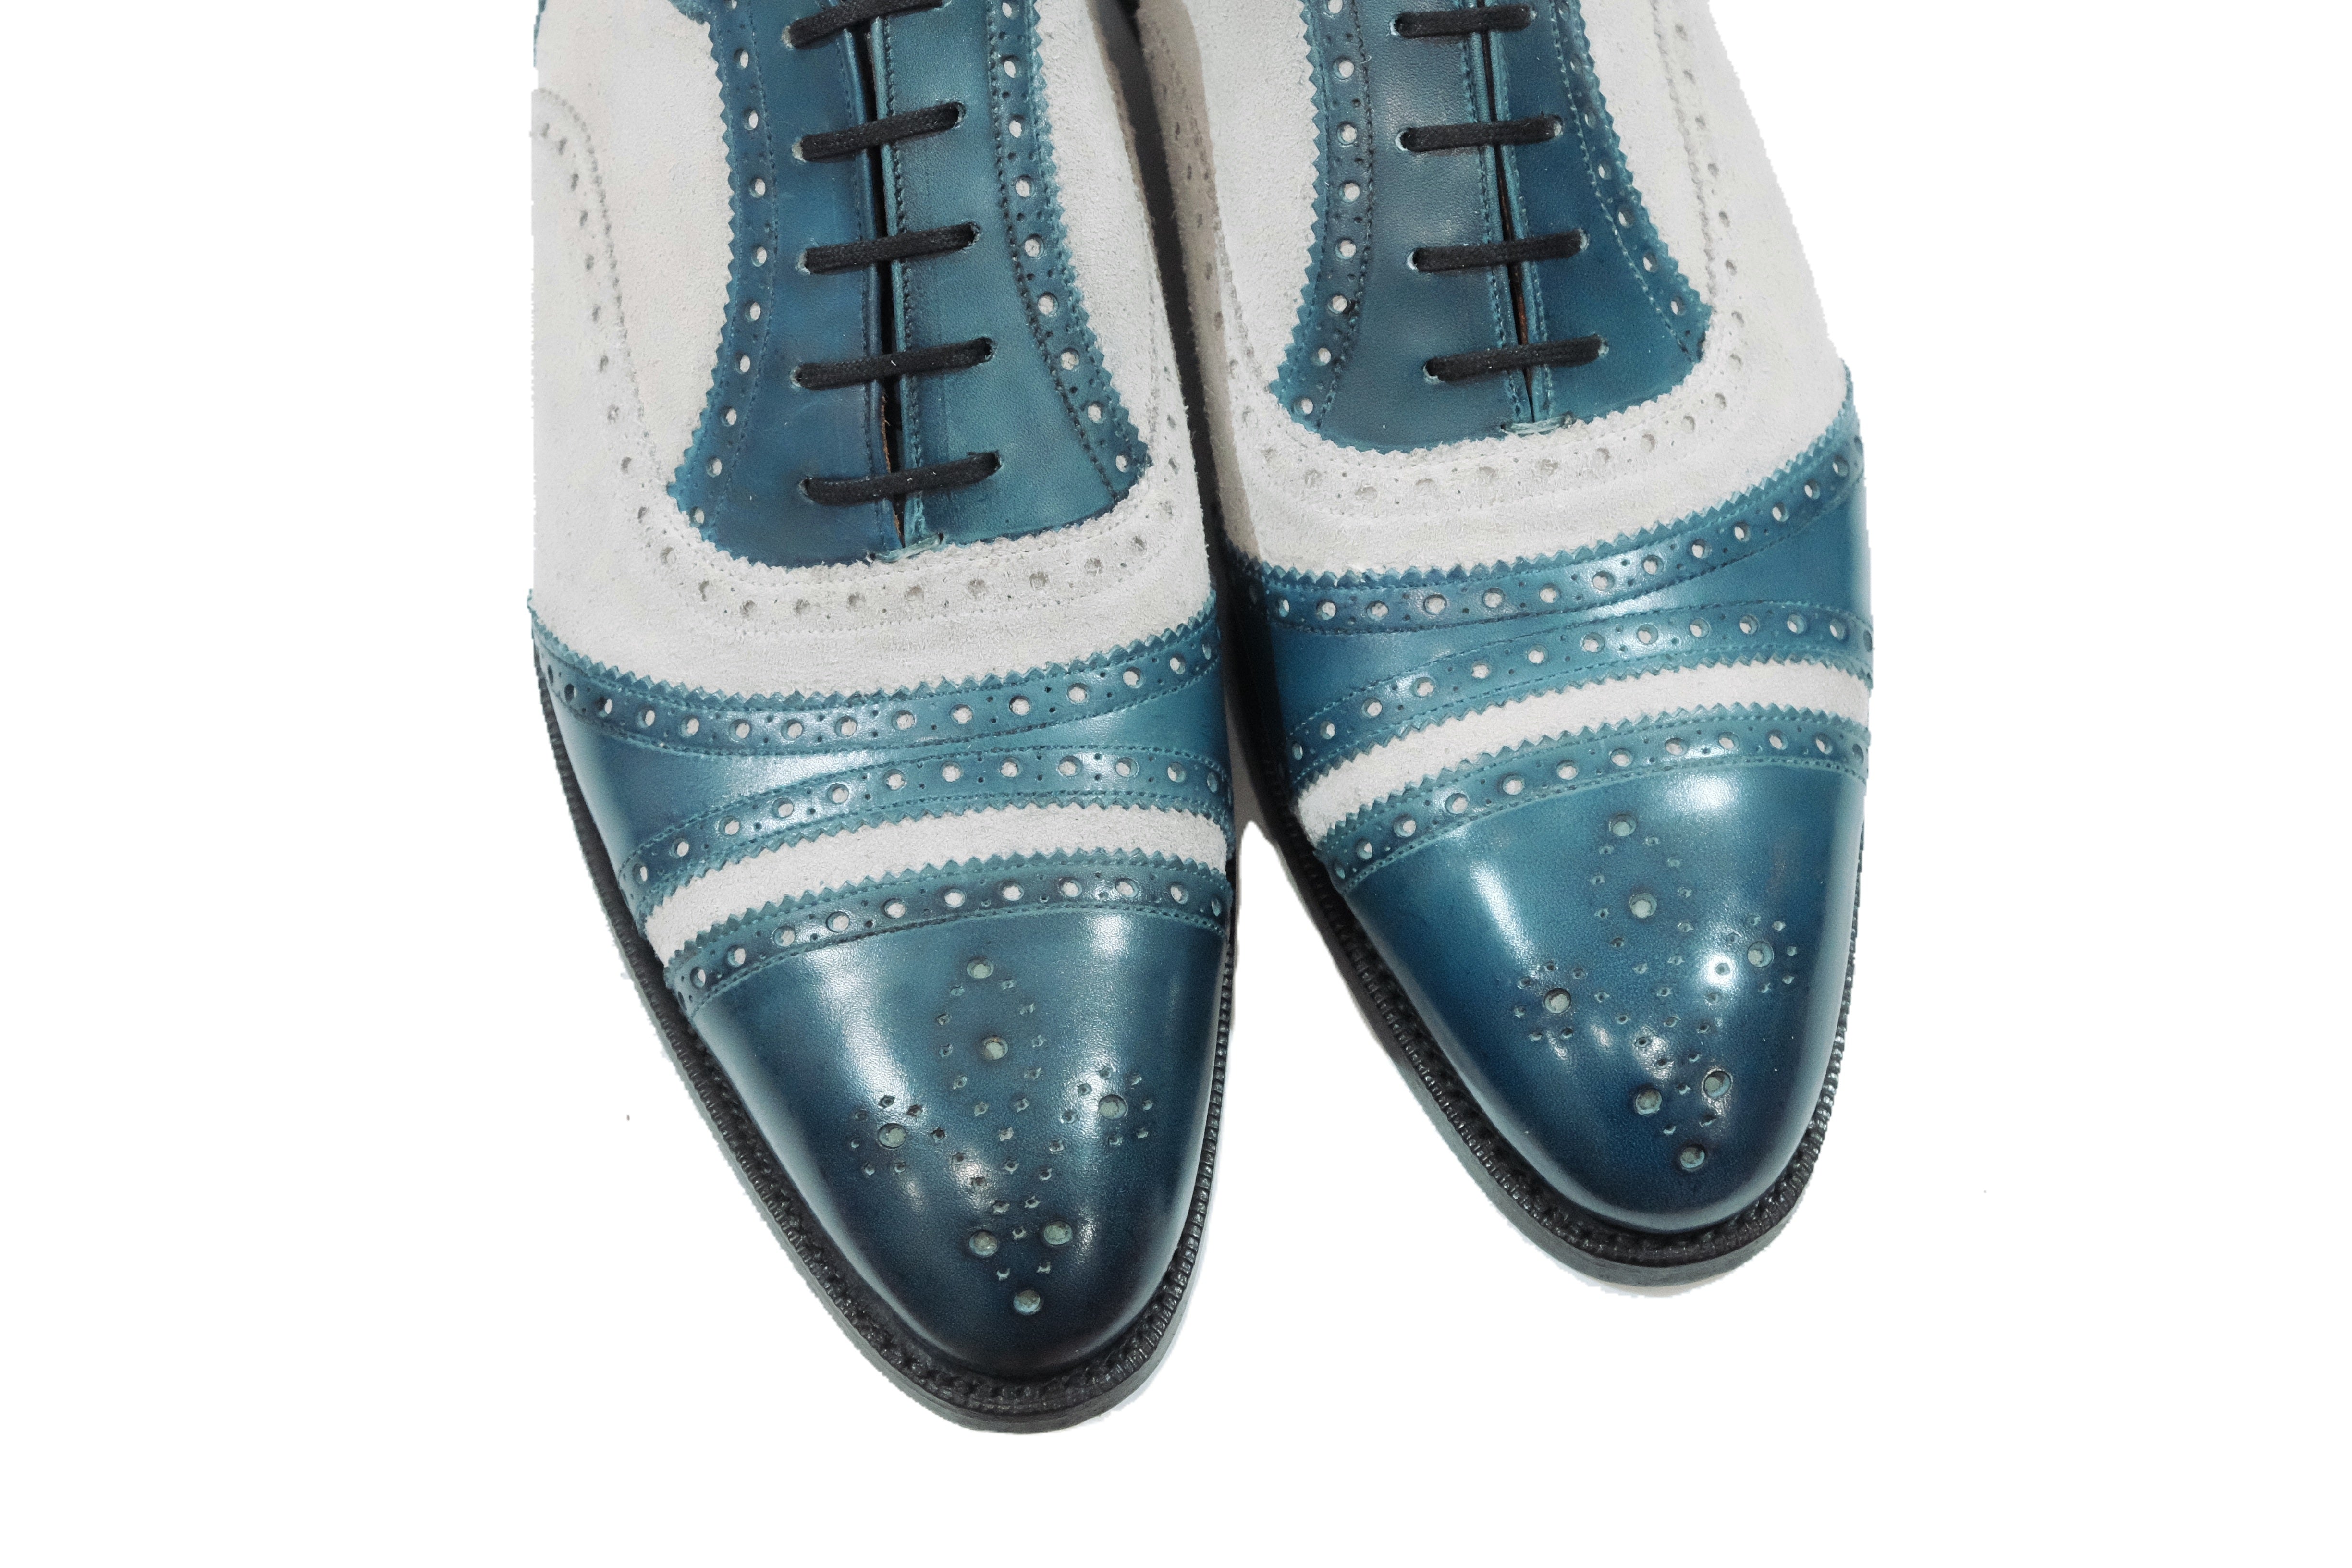 Phillips MTO - Shaded Teal Calf / Pearl Suede - NGT Last - Single Leather Sole